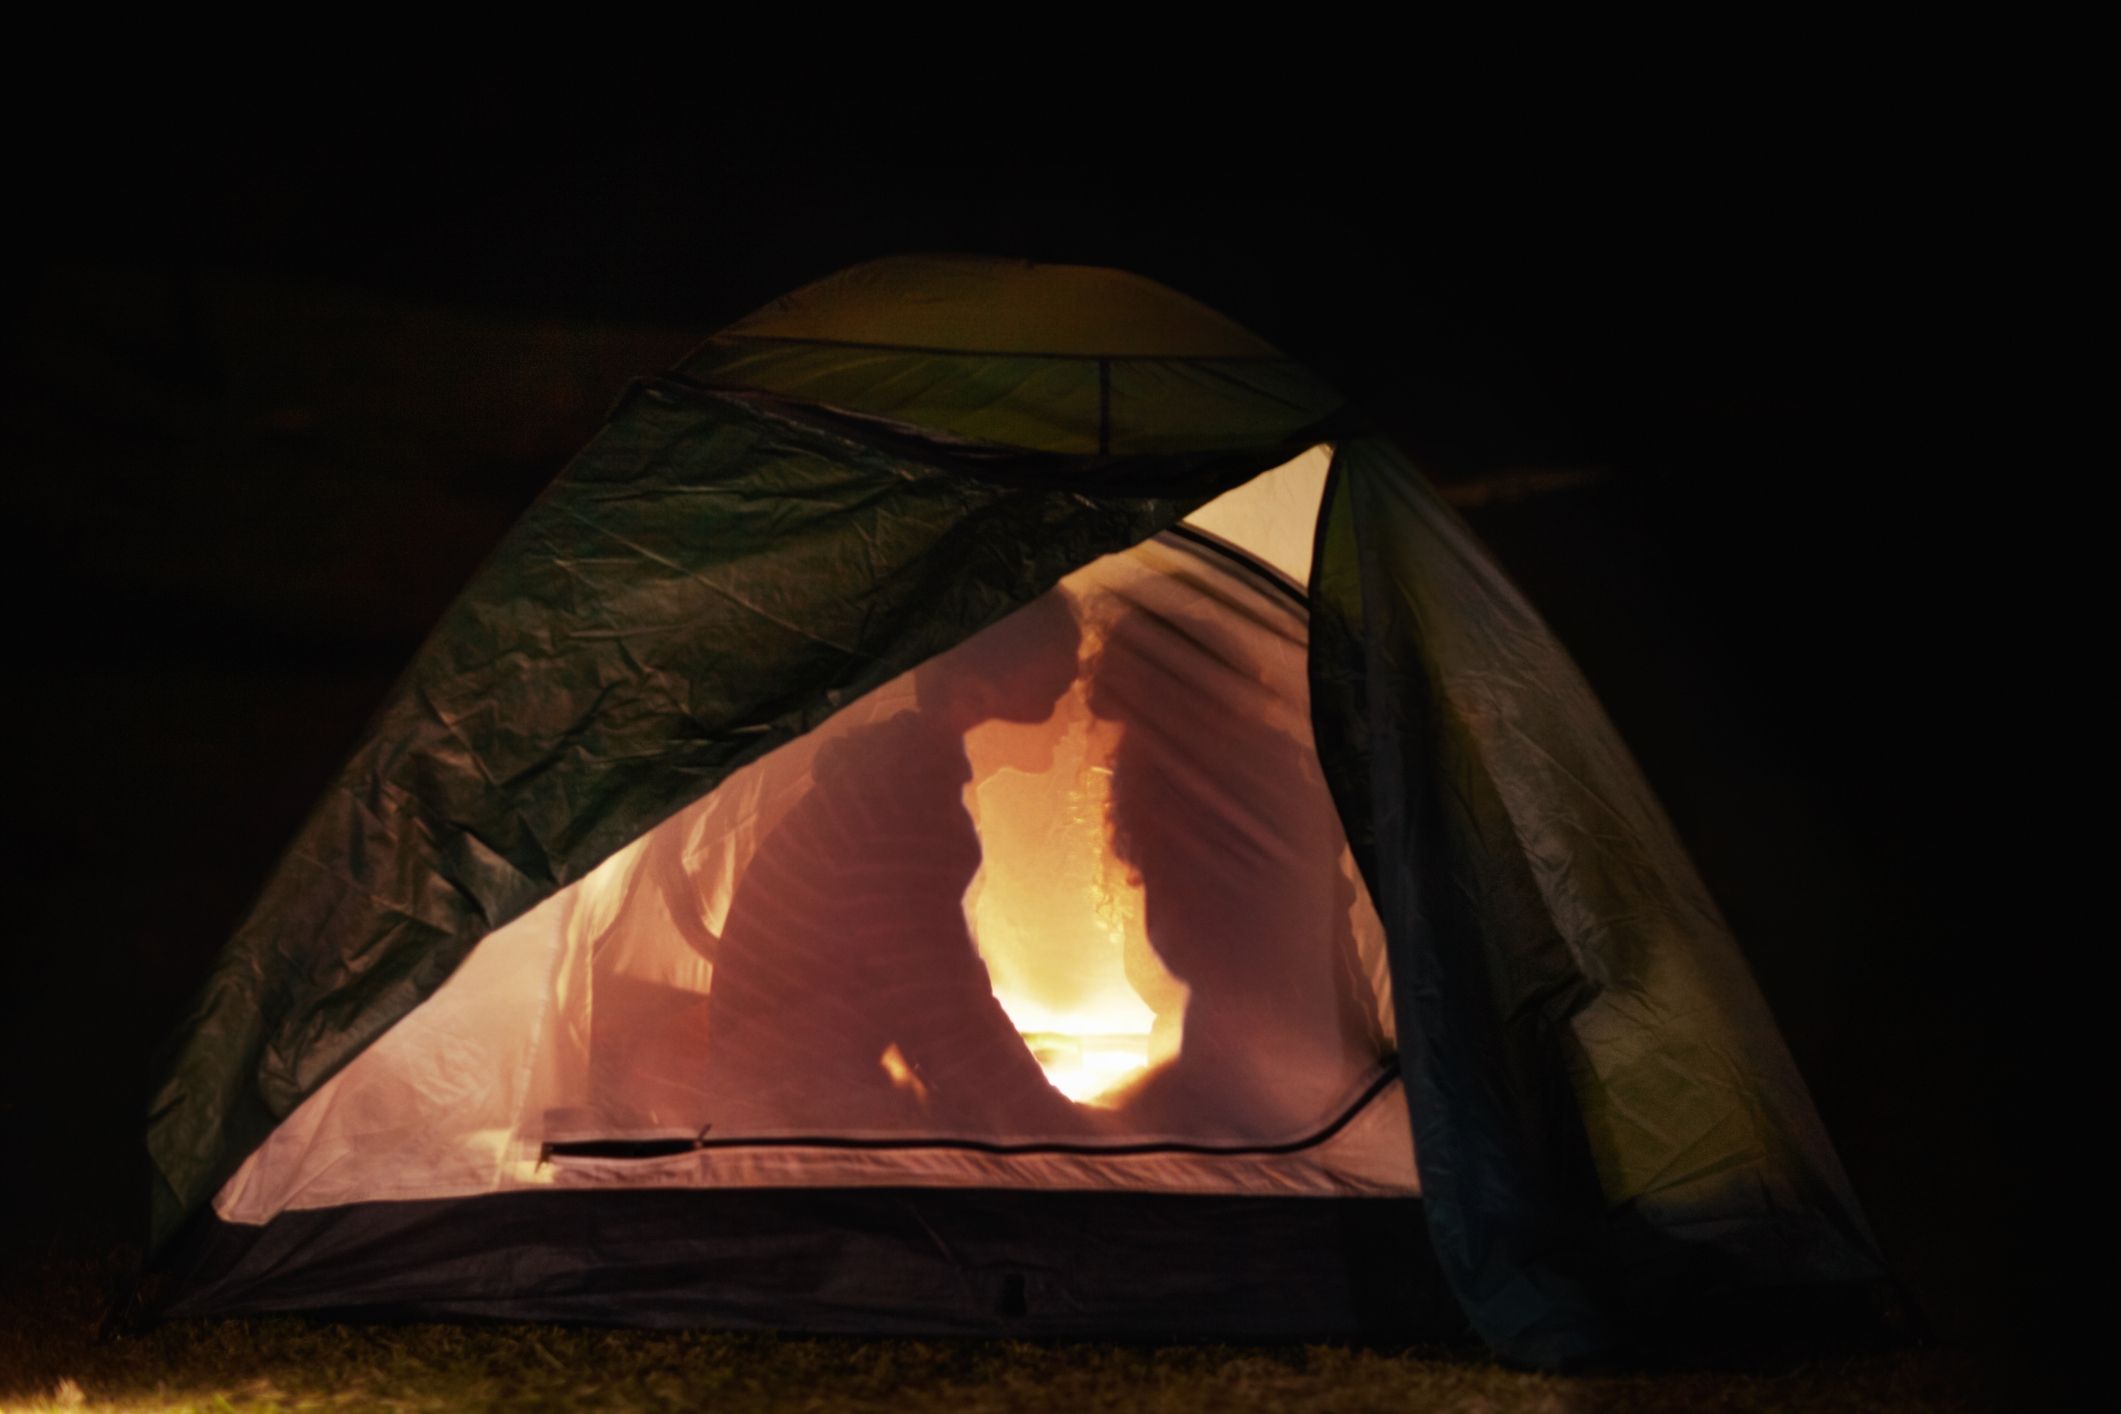 How To Have Camping pic pic pic